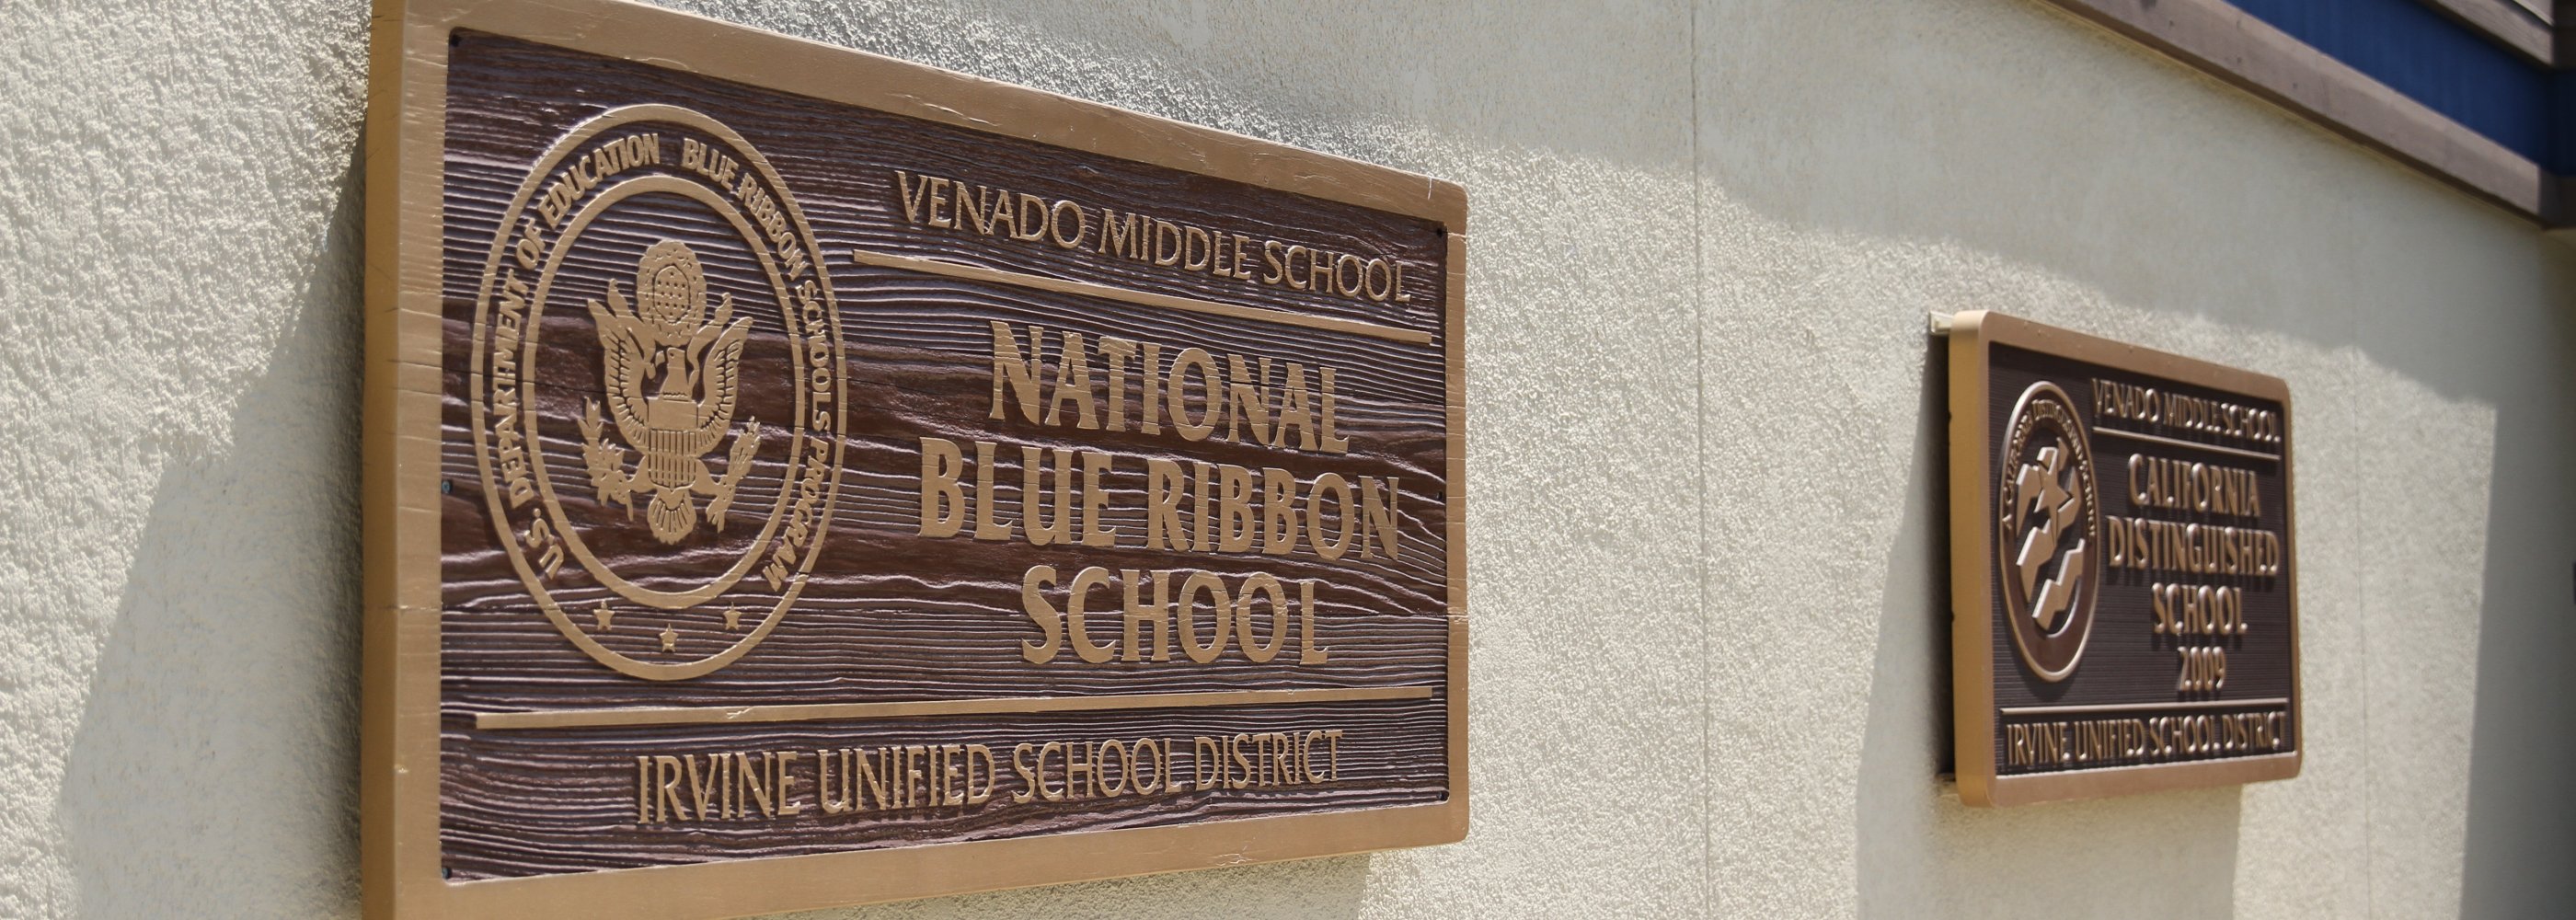 National Blue Ribbon and CA Distinguished School signs